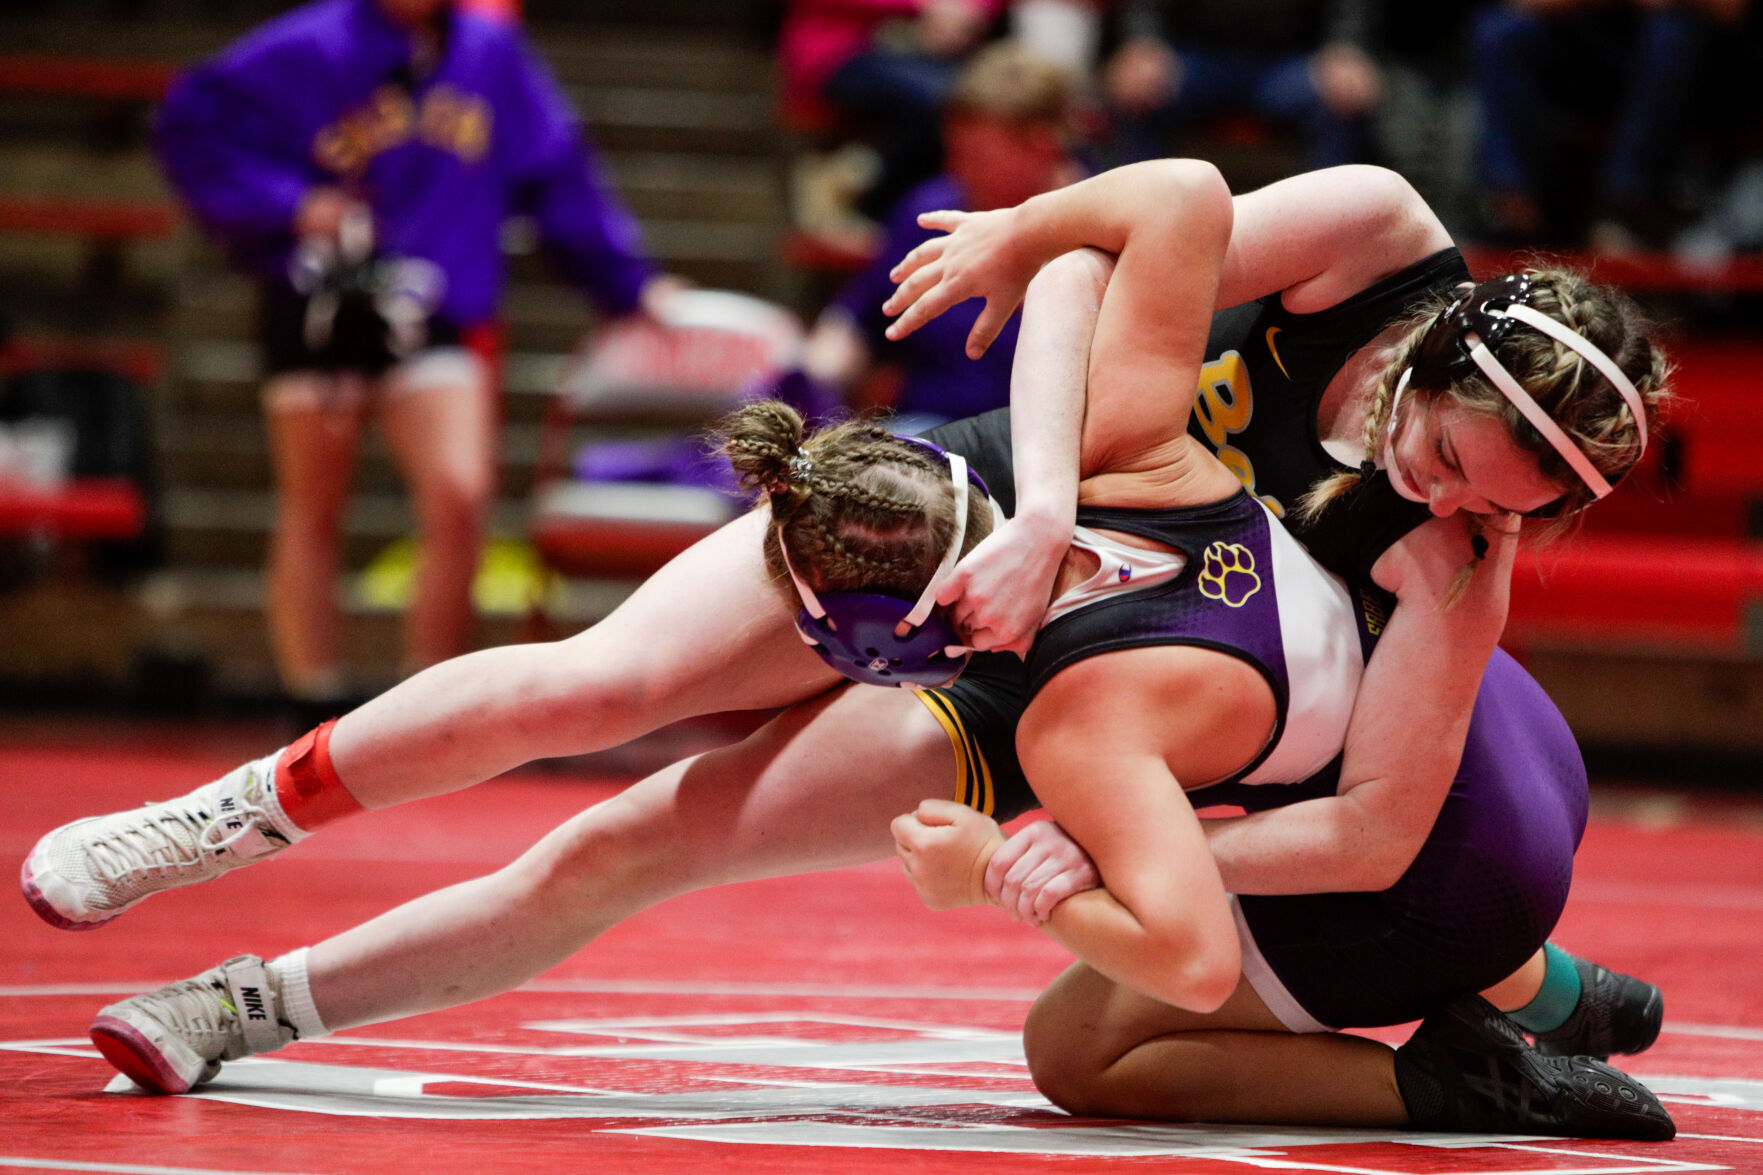 A new era Bettendorf captures first sanctioned girls wrestling event in image picture